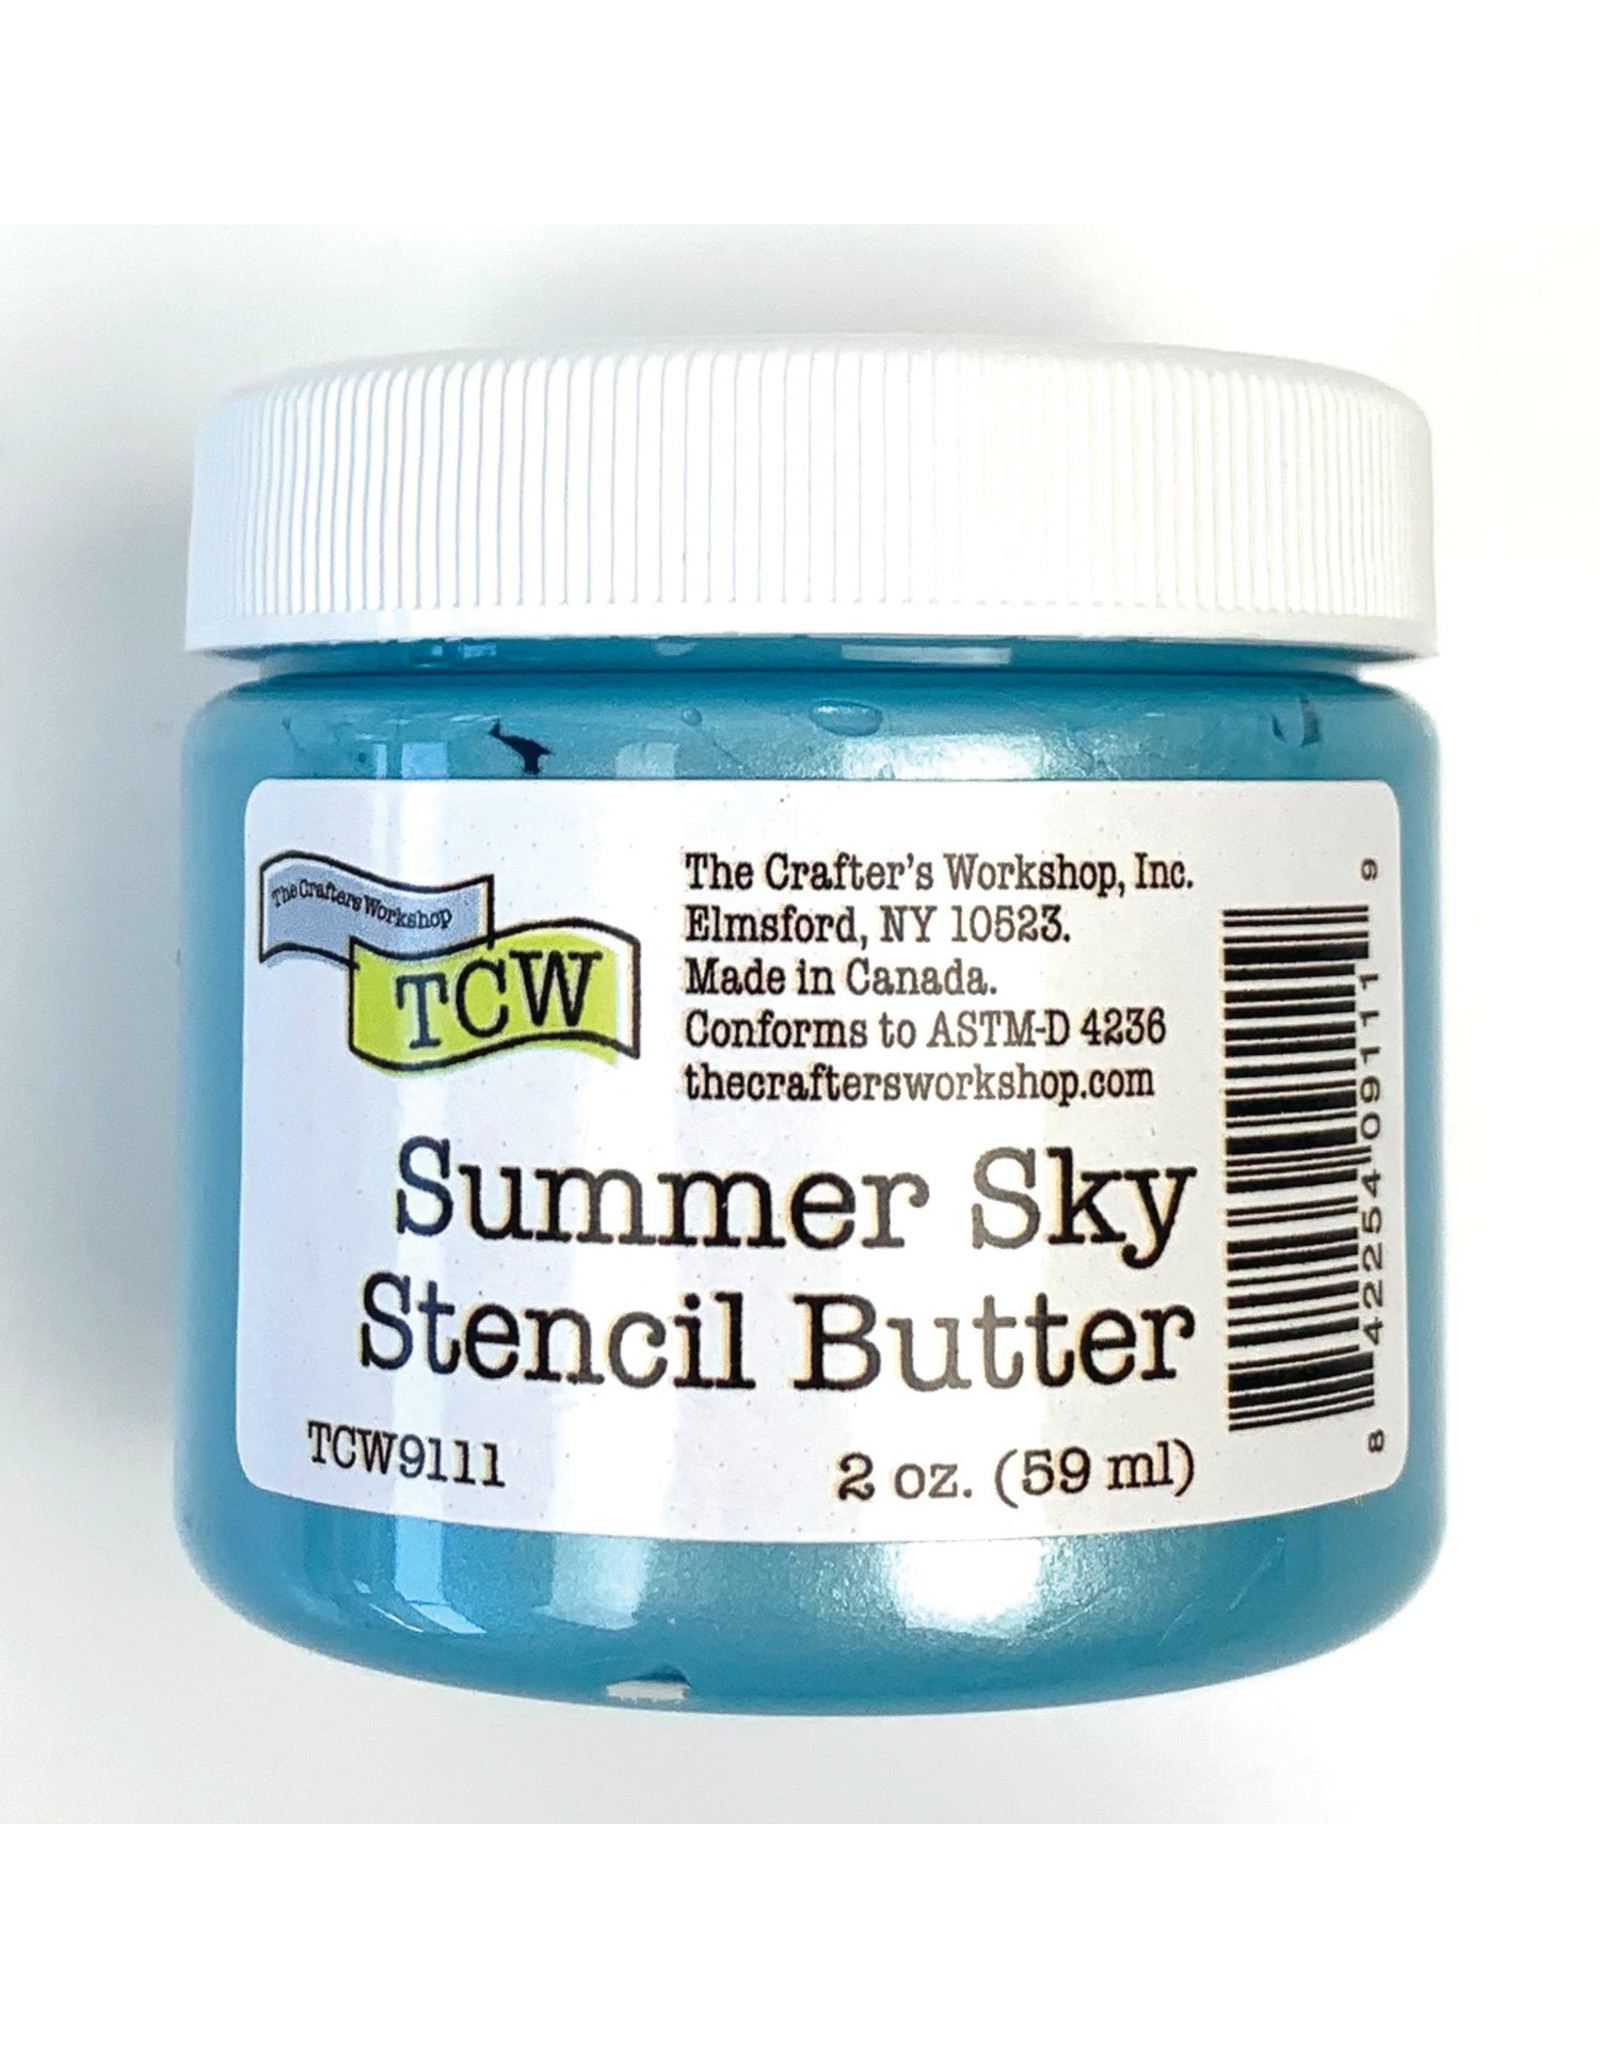 THE CRAFTERS WORKSHOP Stencil Butter 2 oz. - Summer Sky